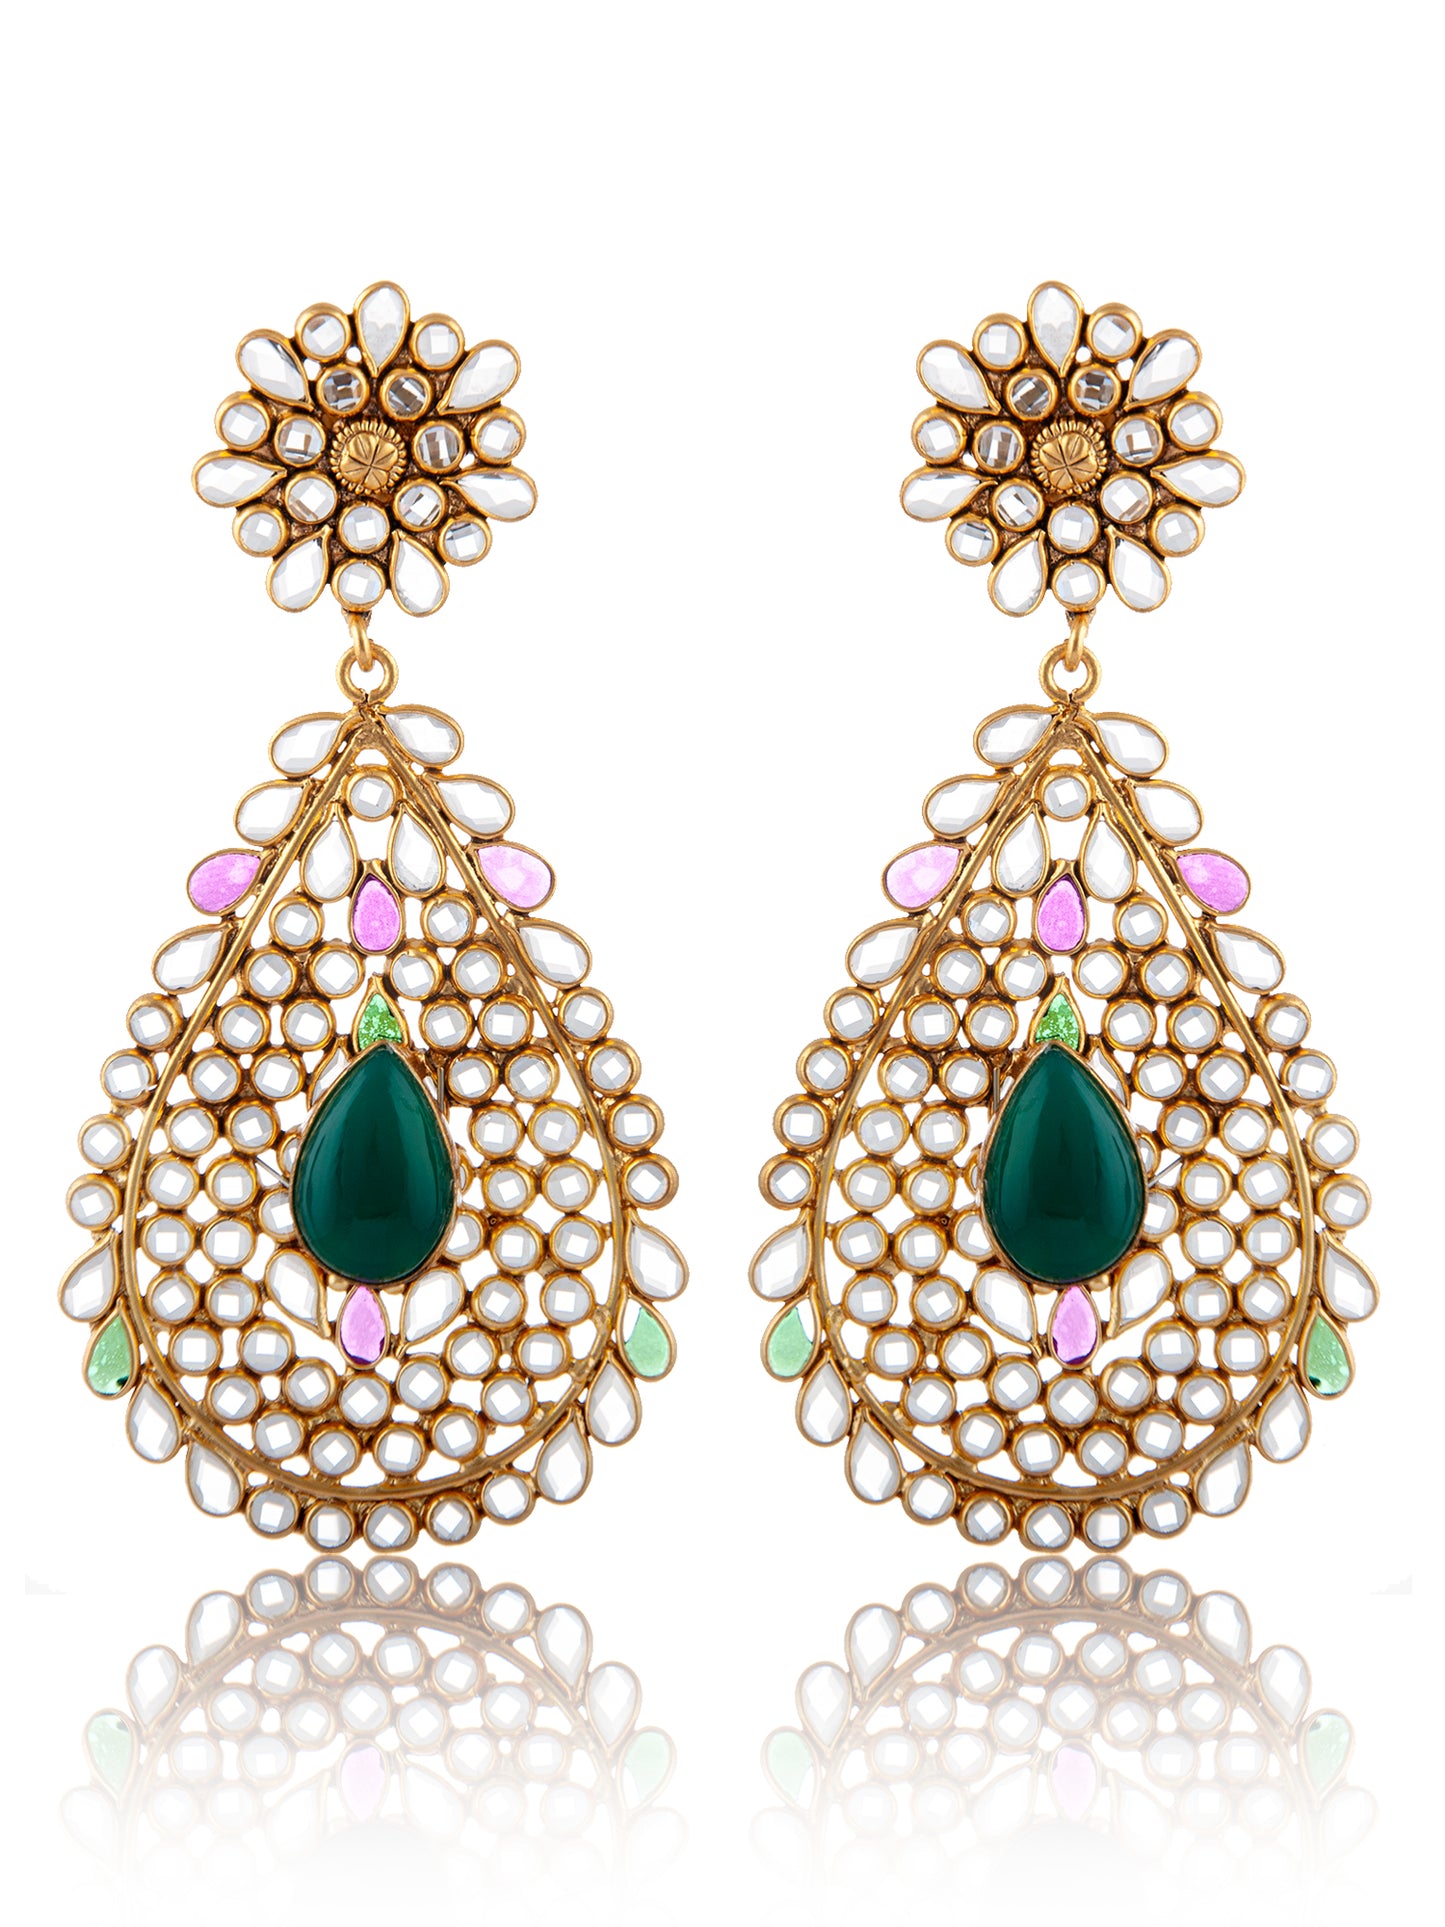 925 Sterling Silver 22K Gold Plated Multicolored Checker Crystal Earrings with Green Onyx